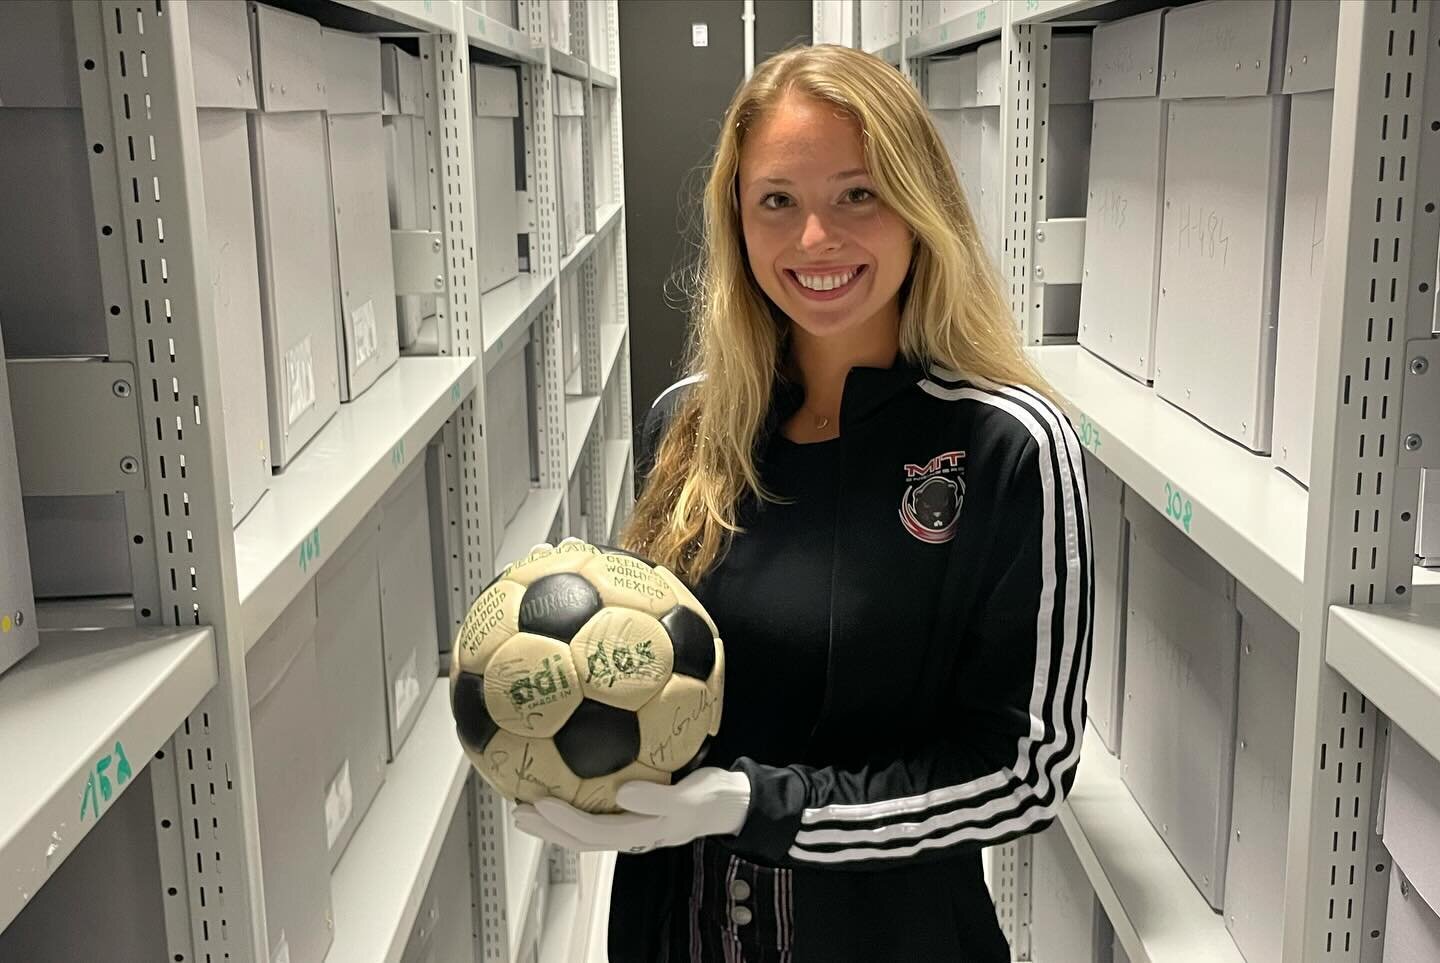 Jess Sonner is pursuing a Master&rsquo;s in Mechanical Engineering under Prof. Peko Hosoi in the MIT Sports Lab, collaborating with adidas for her thesis on women&rsquo;s soccer. A lifelong athlete and former MIT Varsity Soccer player, Jess co-led th